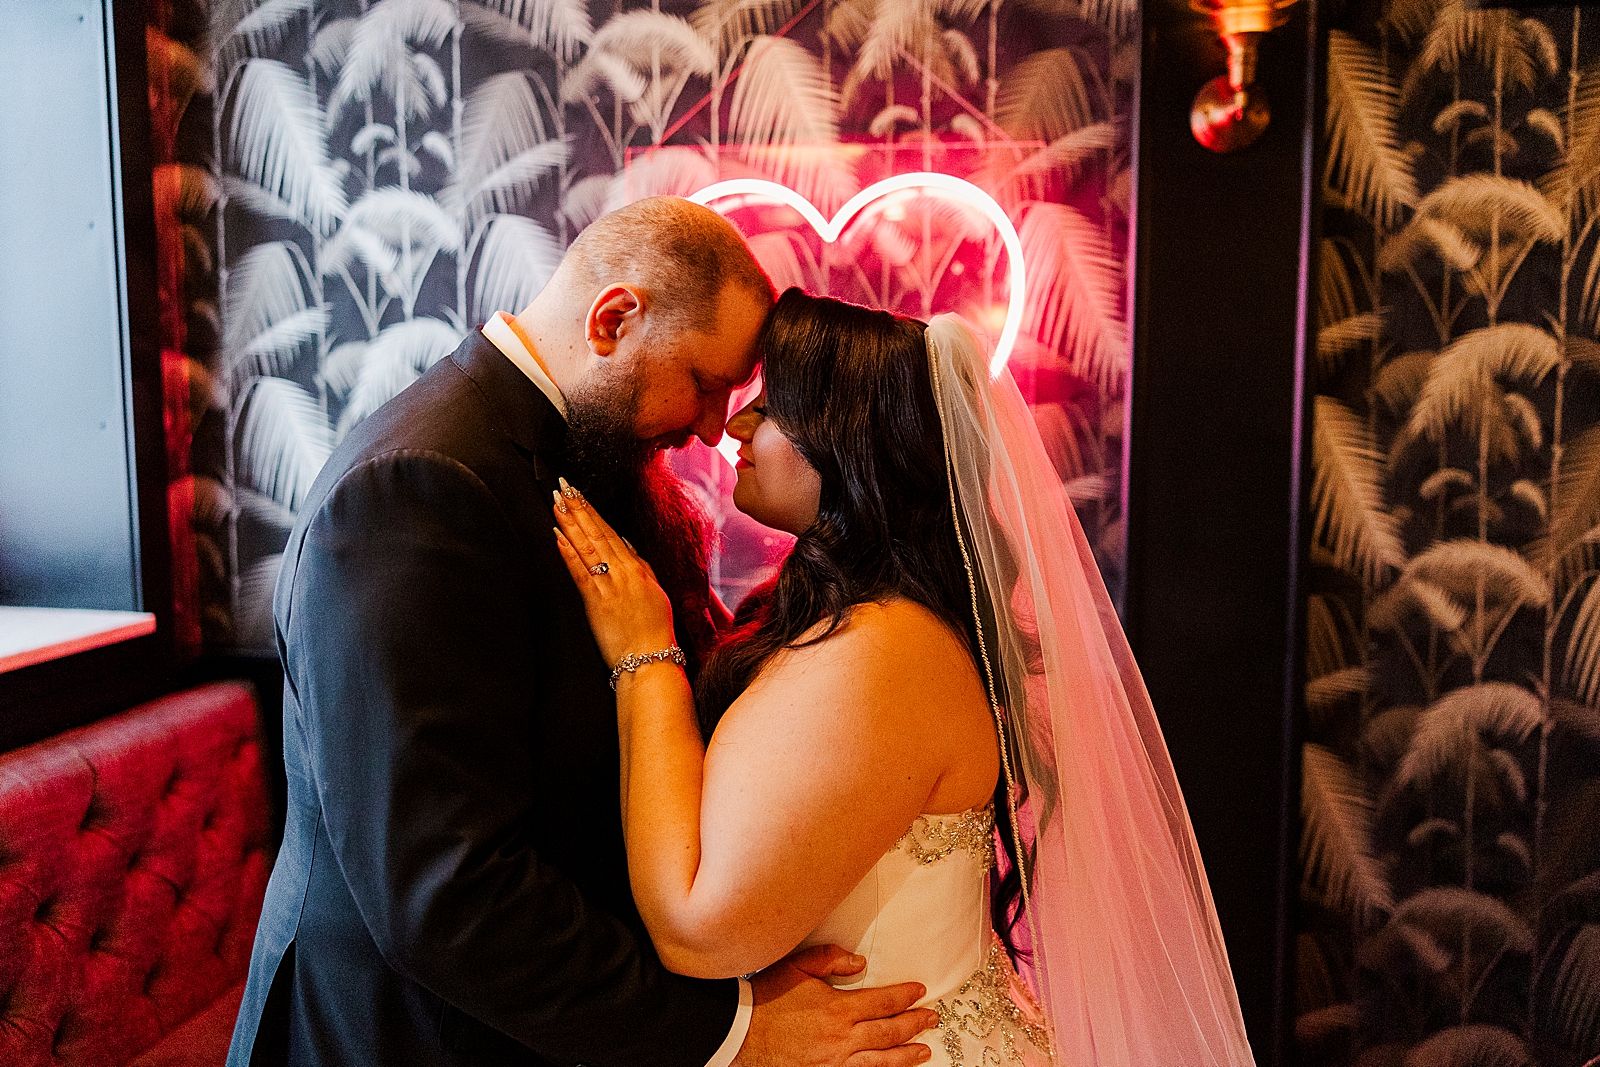 Upper body shot of the couple nose to nose as they embrace in front of a pink florescent light heart sign.